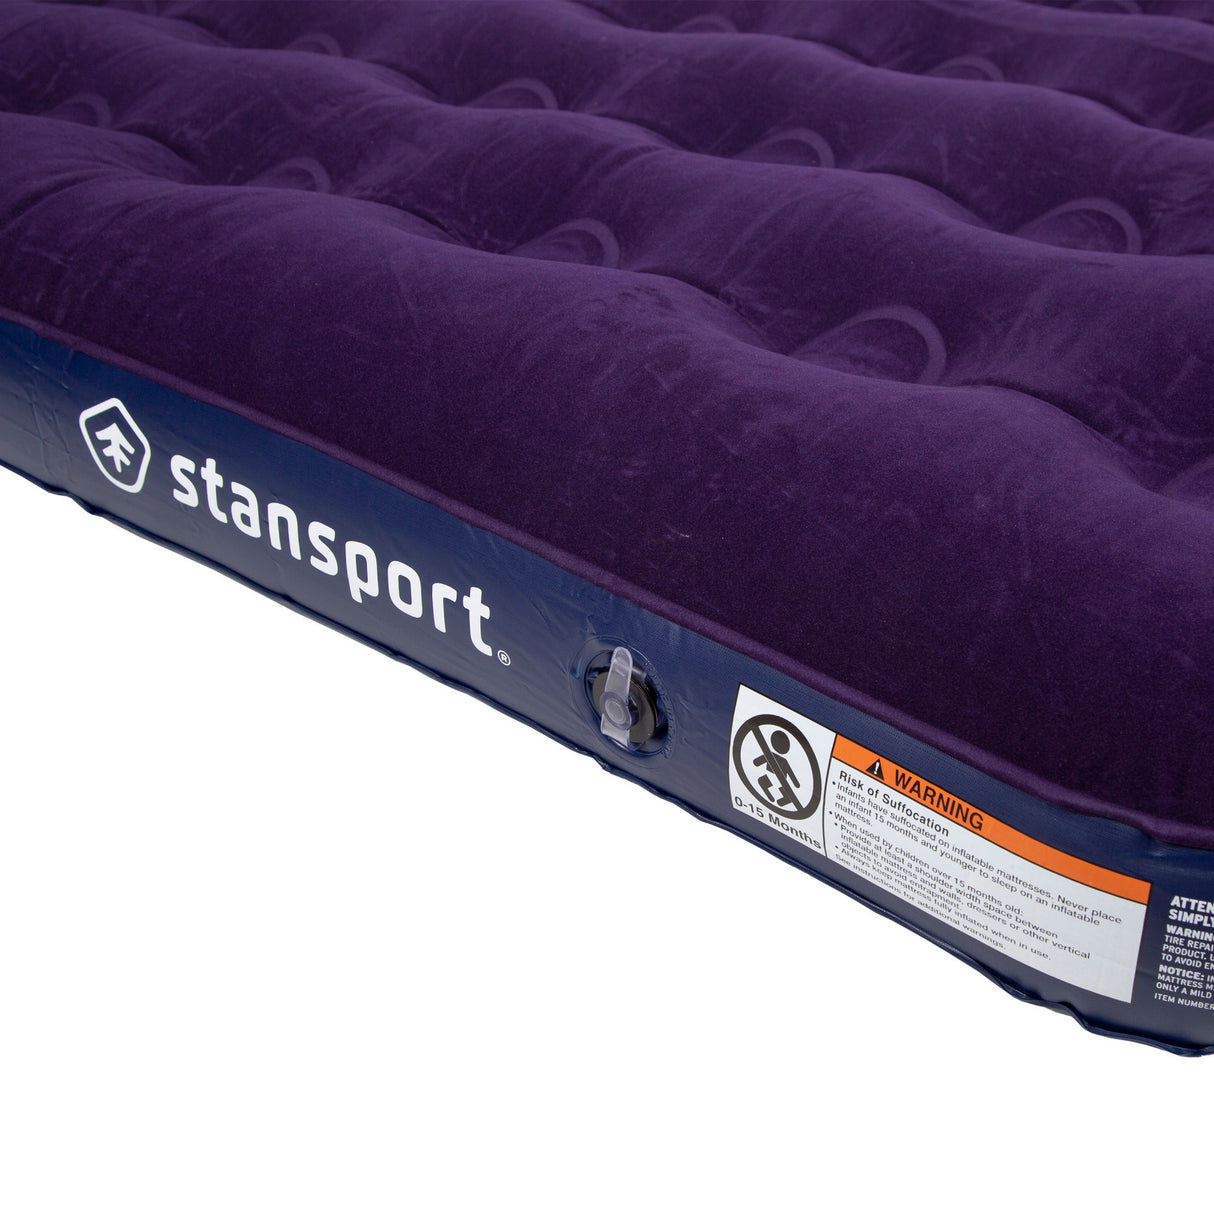 STANSPORT AIR BED - TWO SIZES : TWIN AND QUEEN